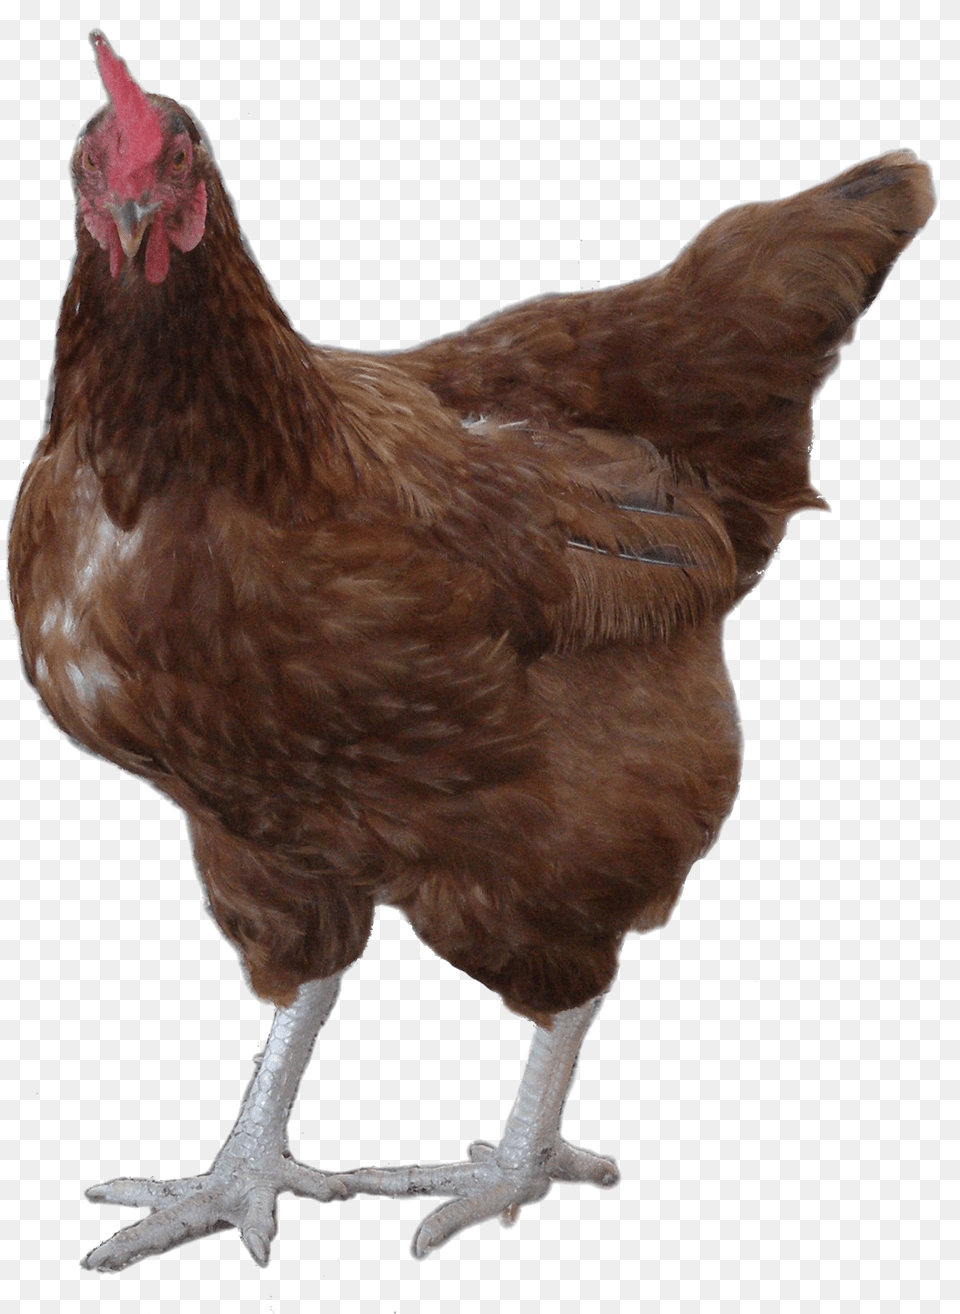 Hd Rooster Image Background Hen, Animal, Bird, Chicken, Fowl Png